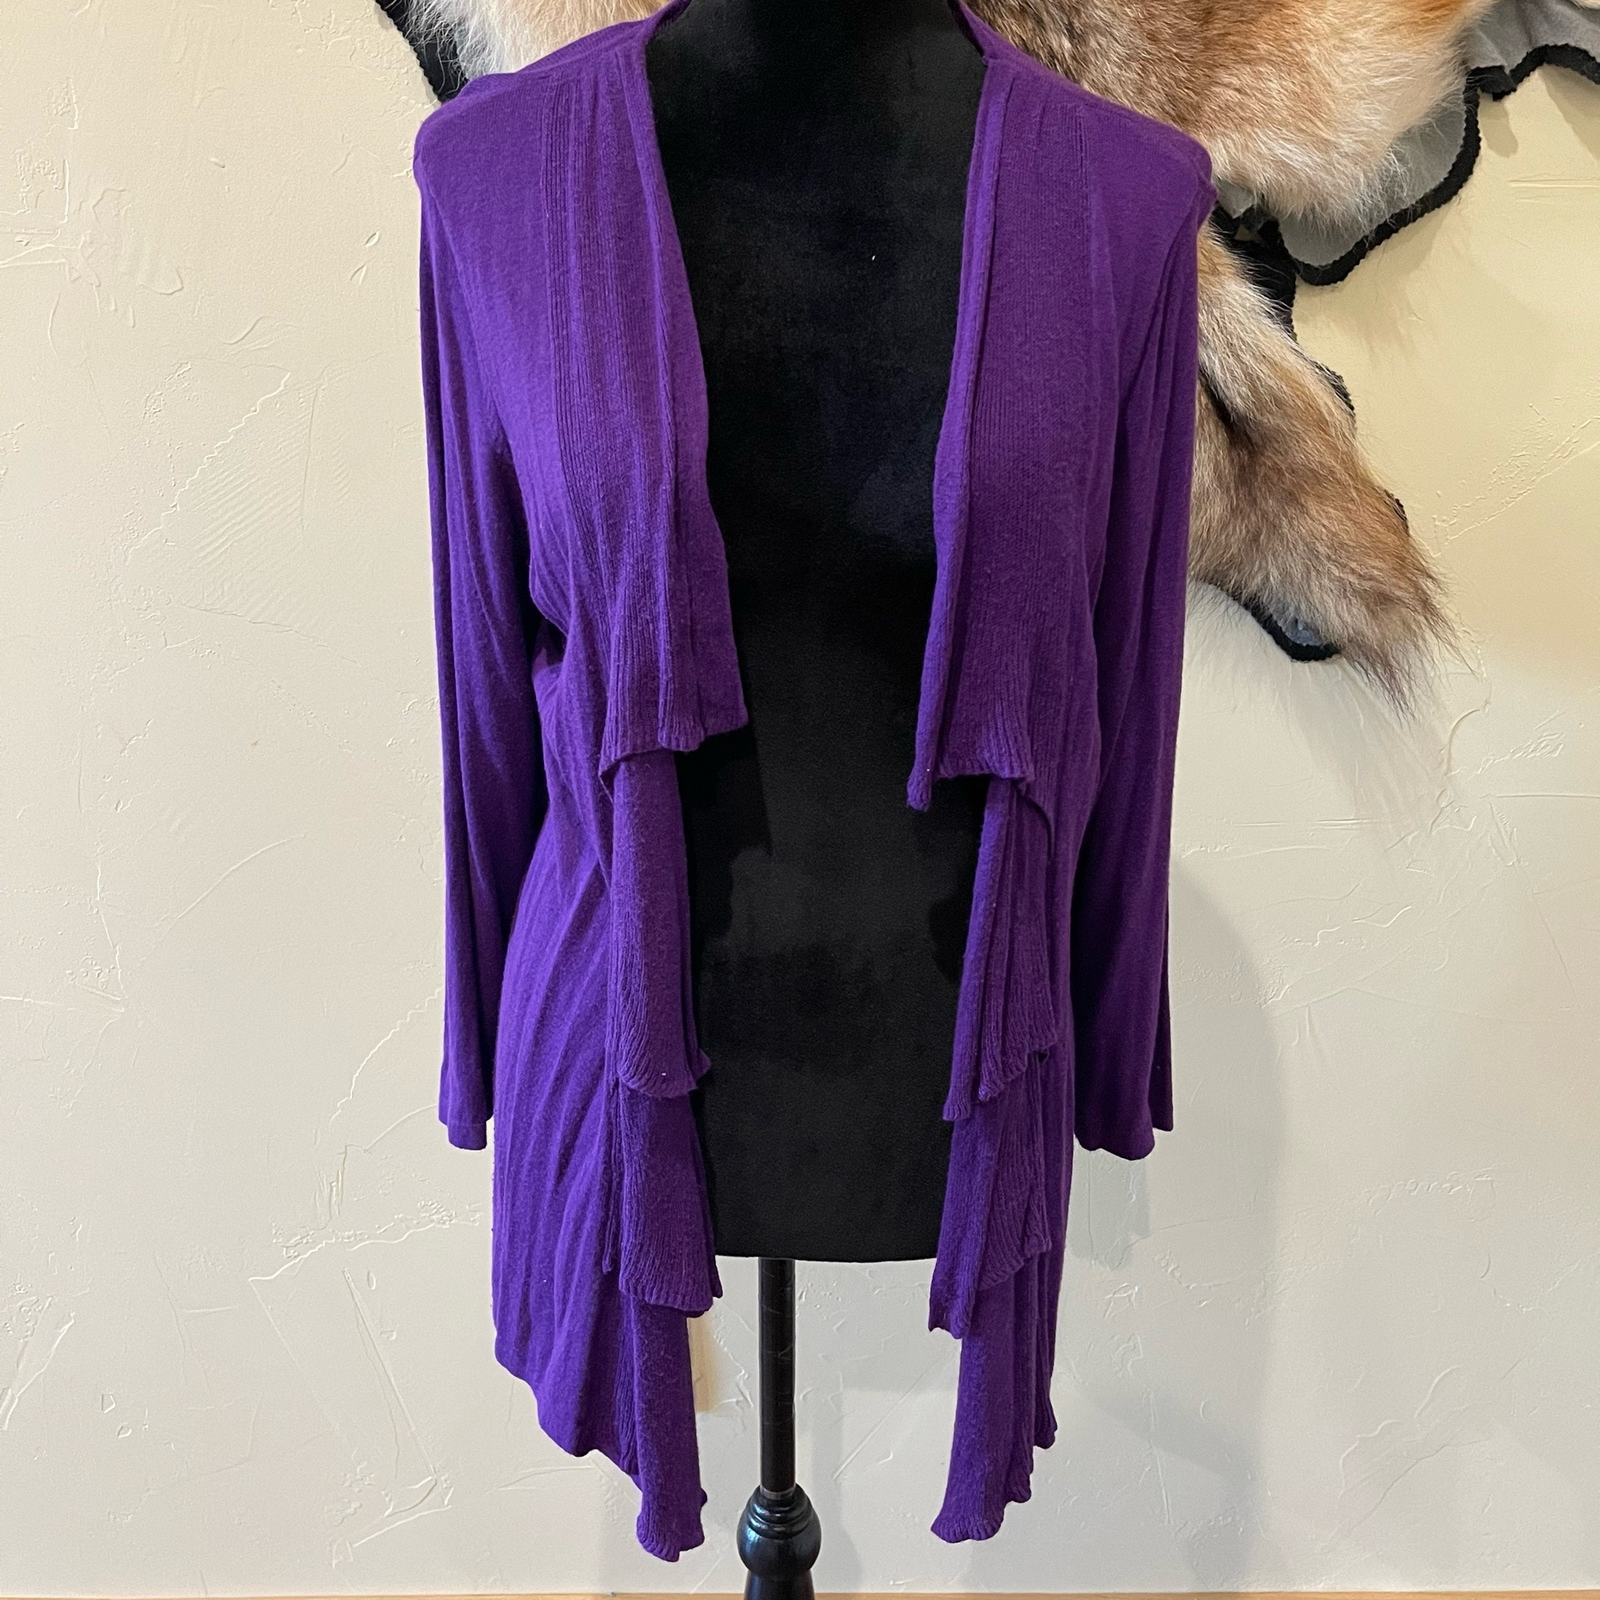 Primary image for Chico’s Purple Waterfall Open Front Cardigan